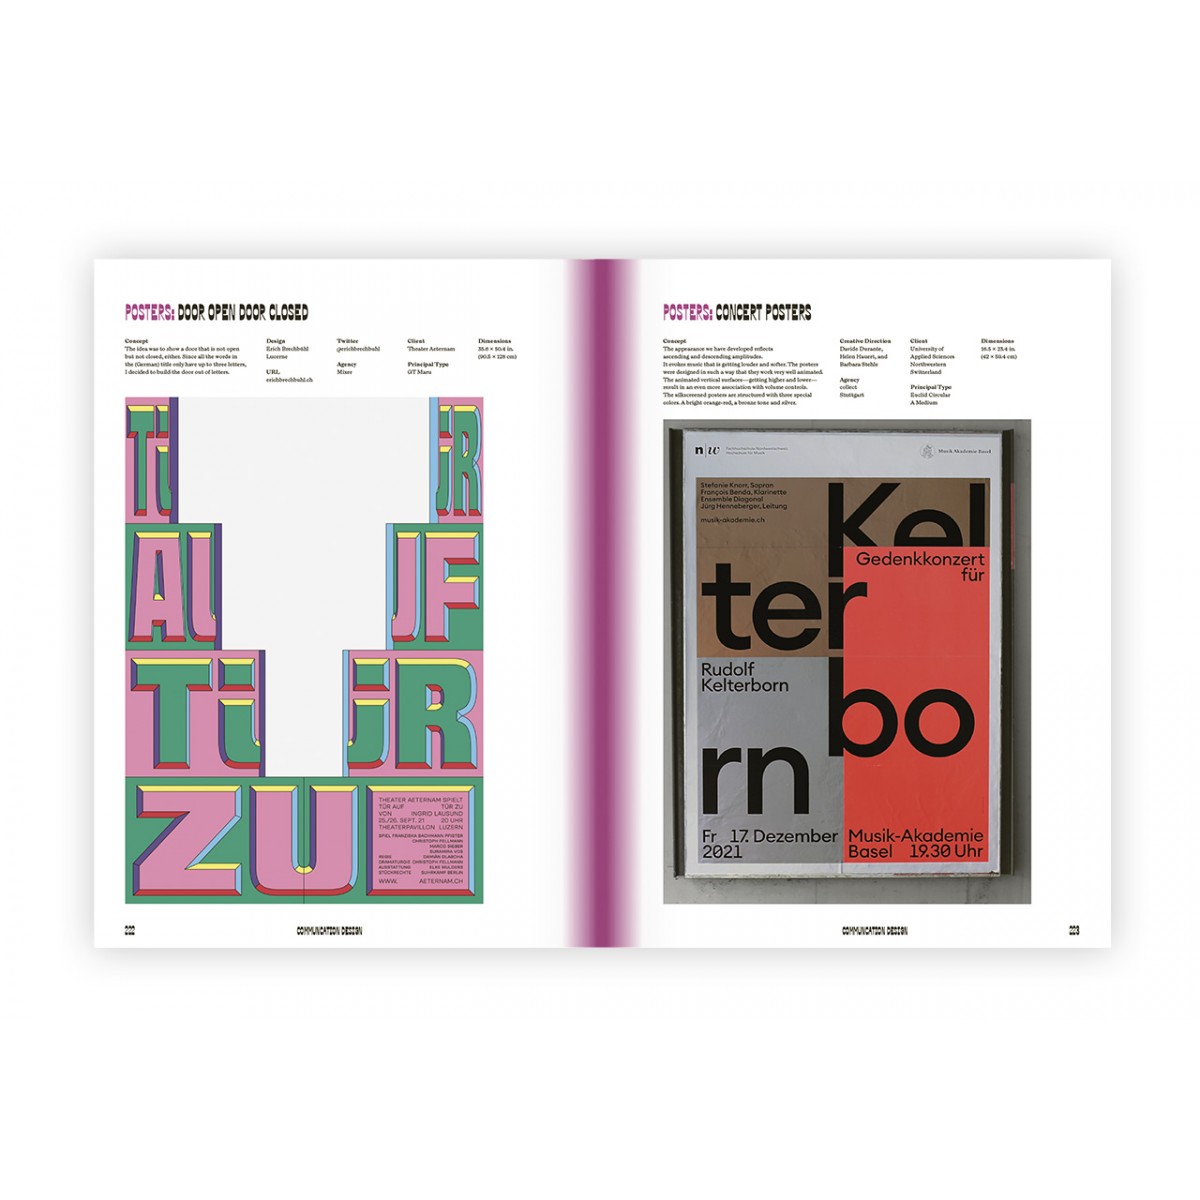 The World's Best Typography
The 43. Annual of the Type Directors Club 2022